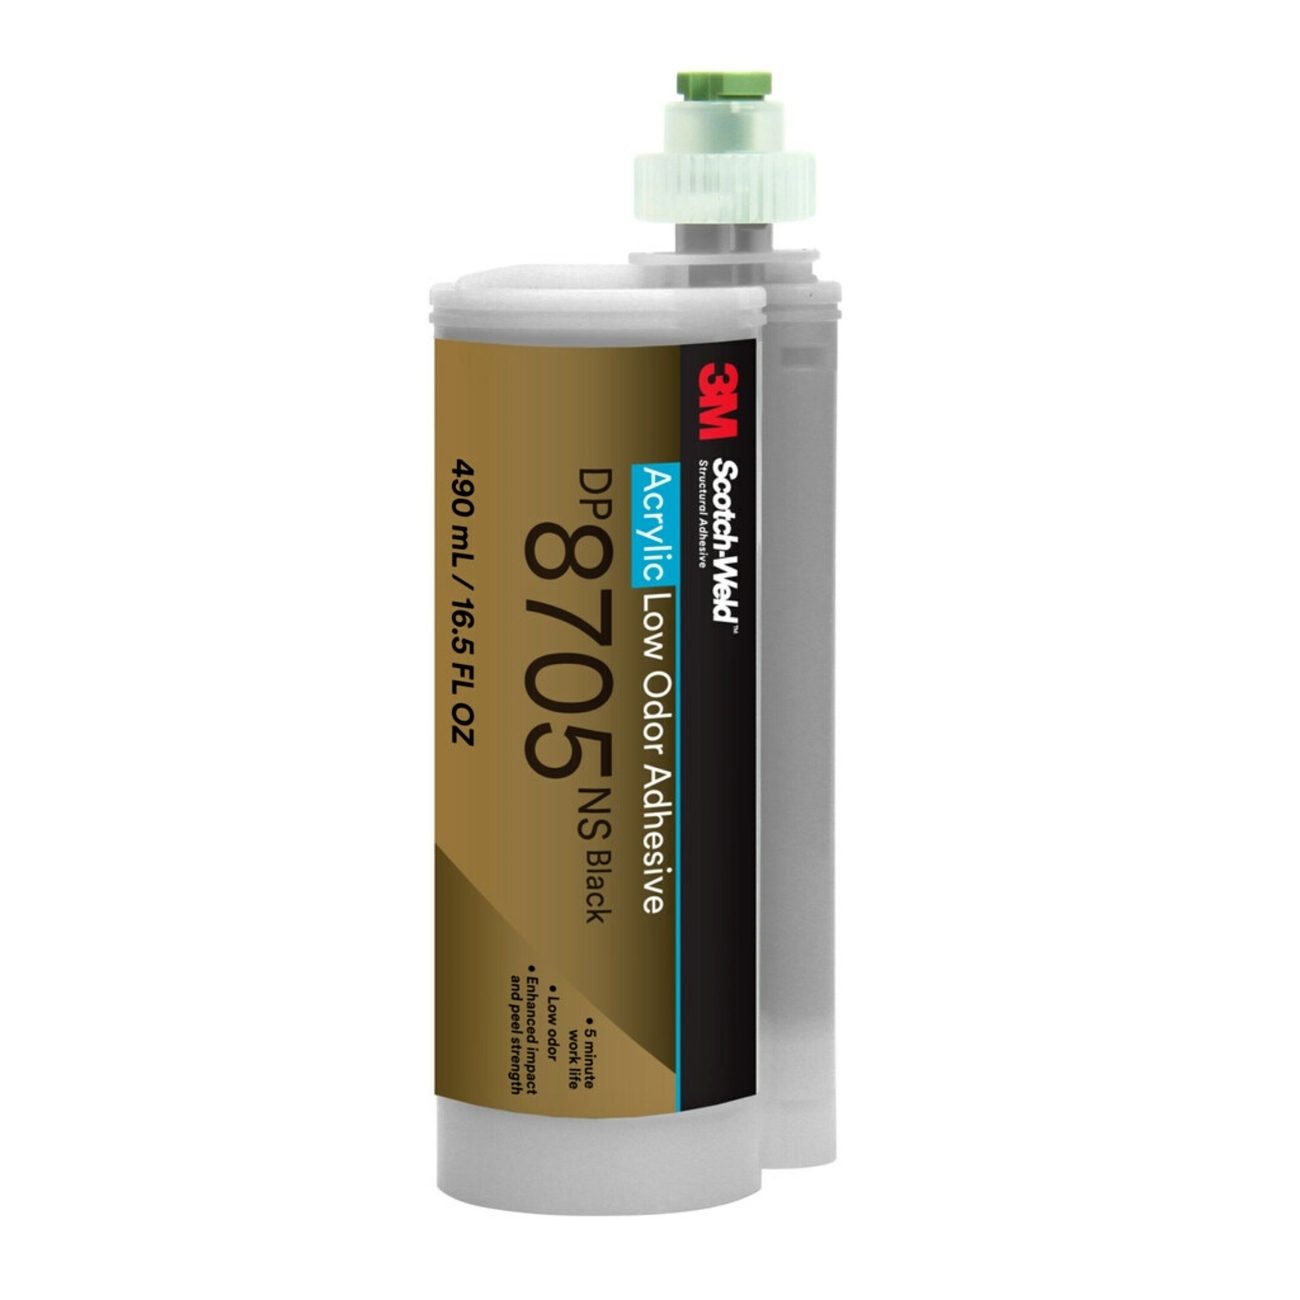 3M Scotch-Weld 2-component acrylate-based construction adhesive for the EPX system DP 8705 NS, black, 490 ml